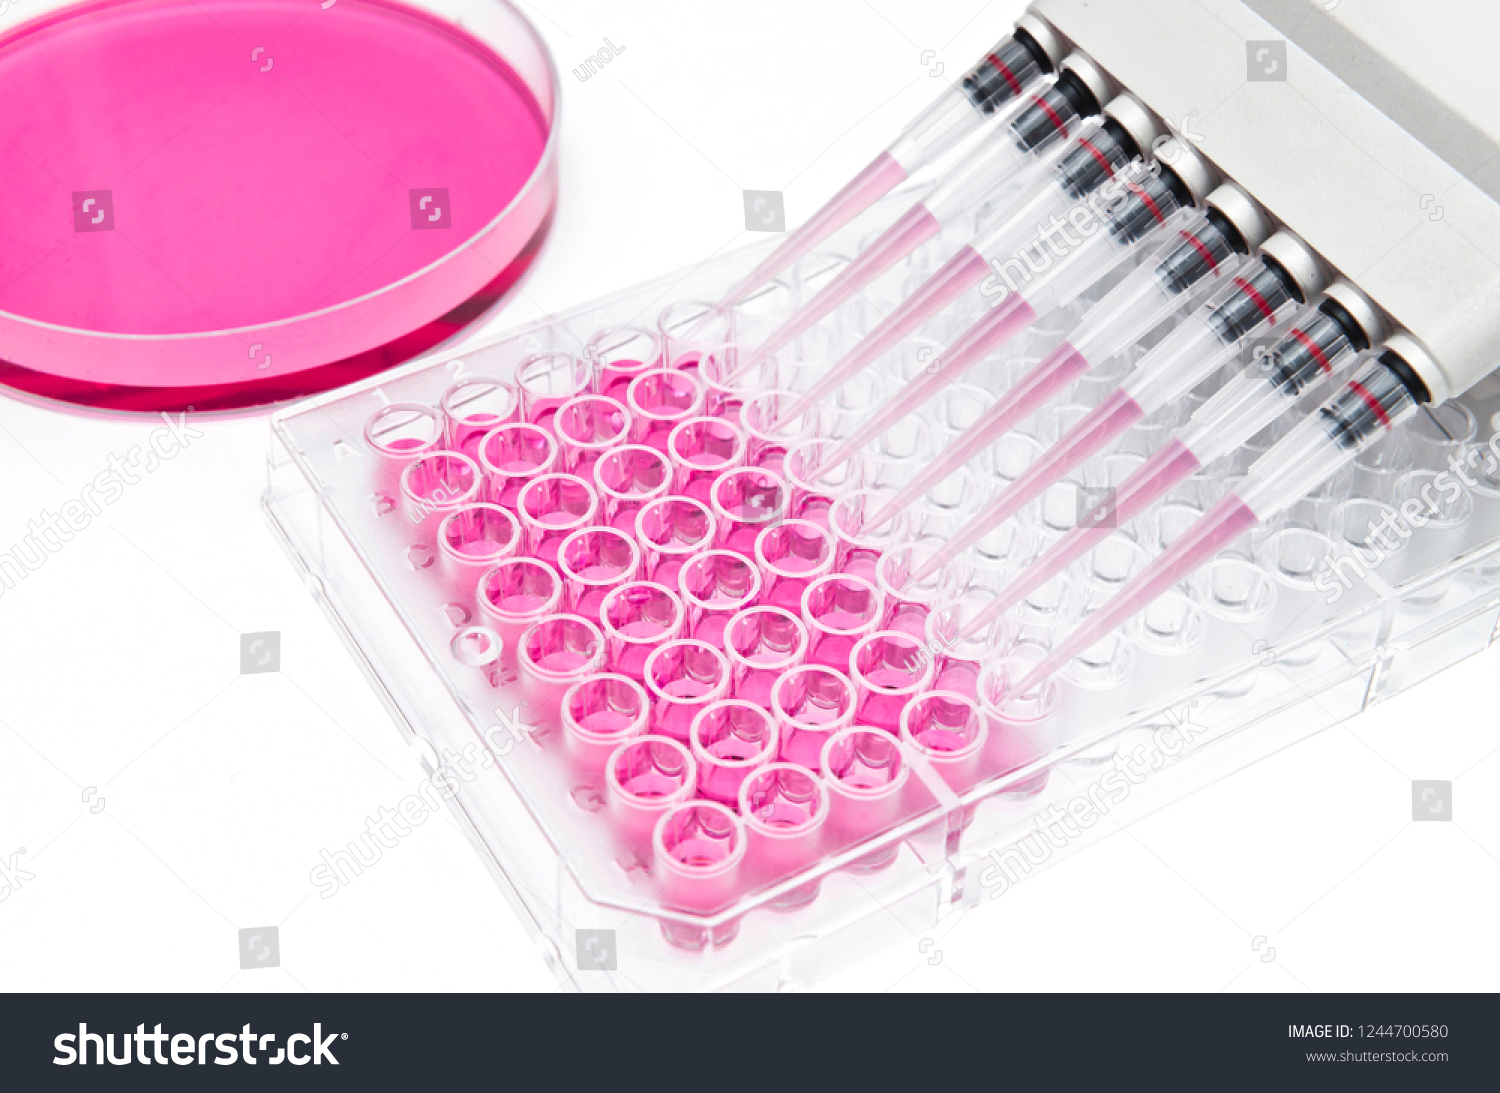 In vitro cellular assay using multi pipette and 96 well micro plate
 #1244700580